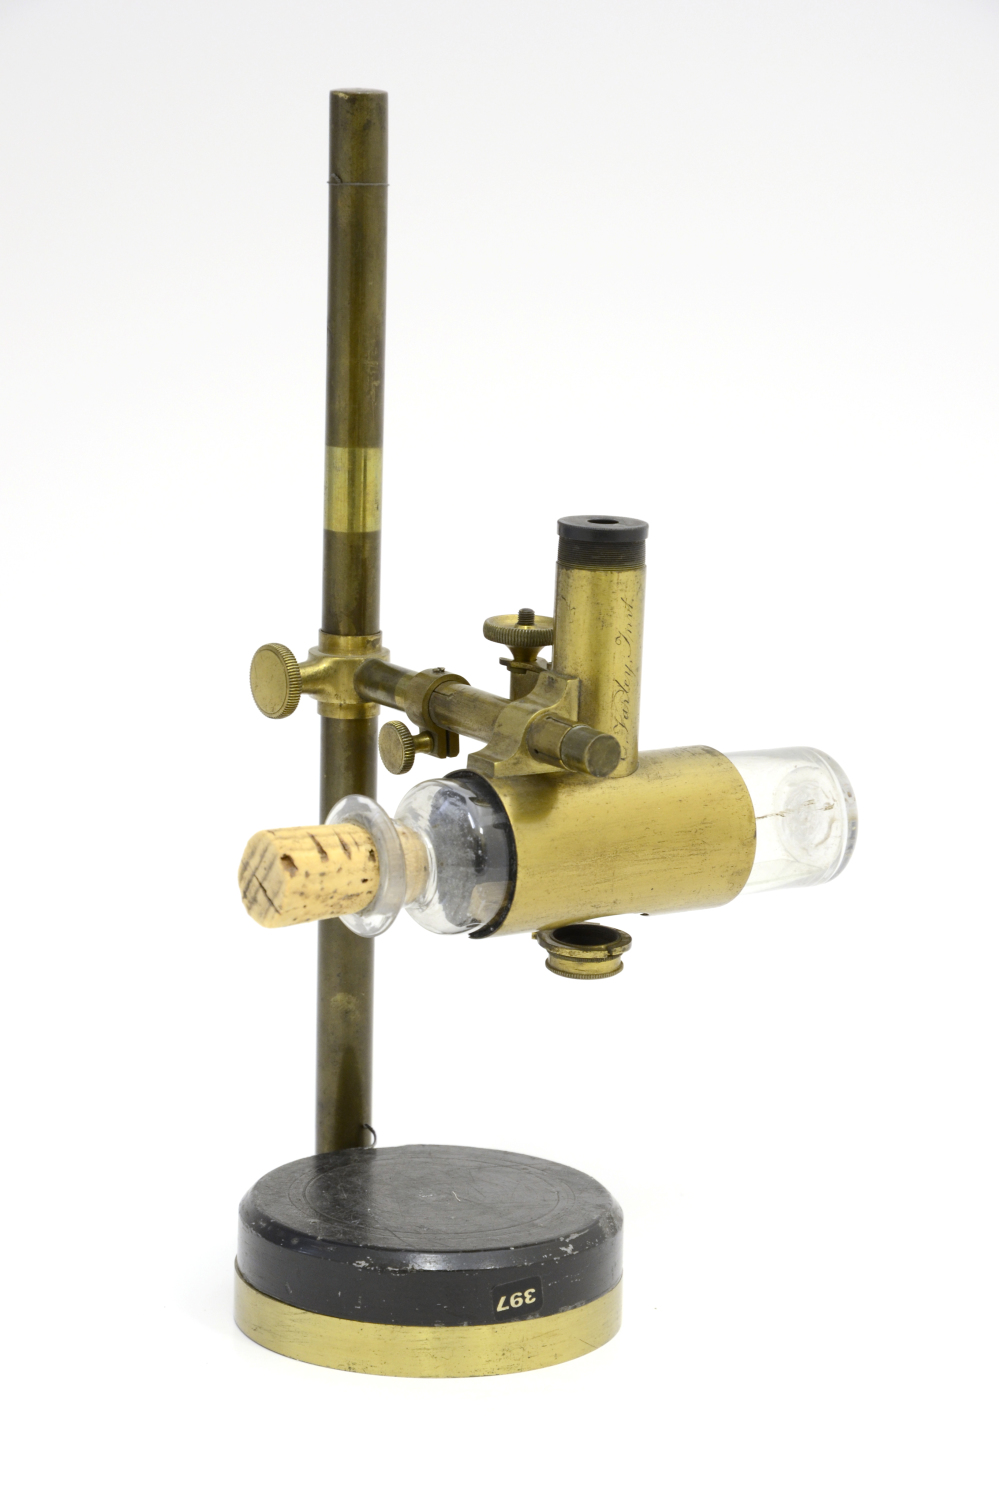 preview image for Specimen Bottle for Simple Vial Microscope, by C. Varley, English, c. 1835